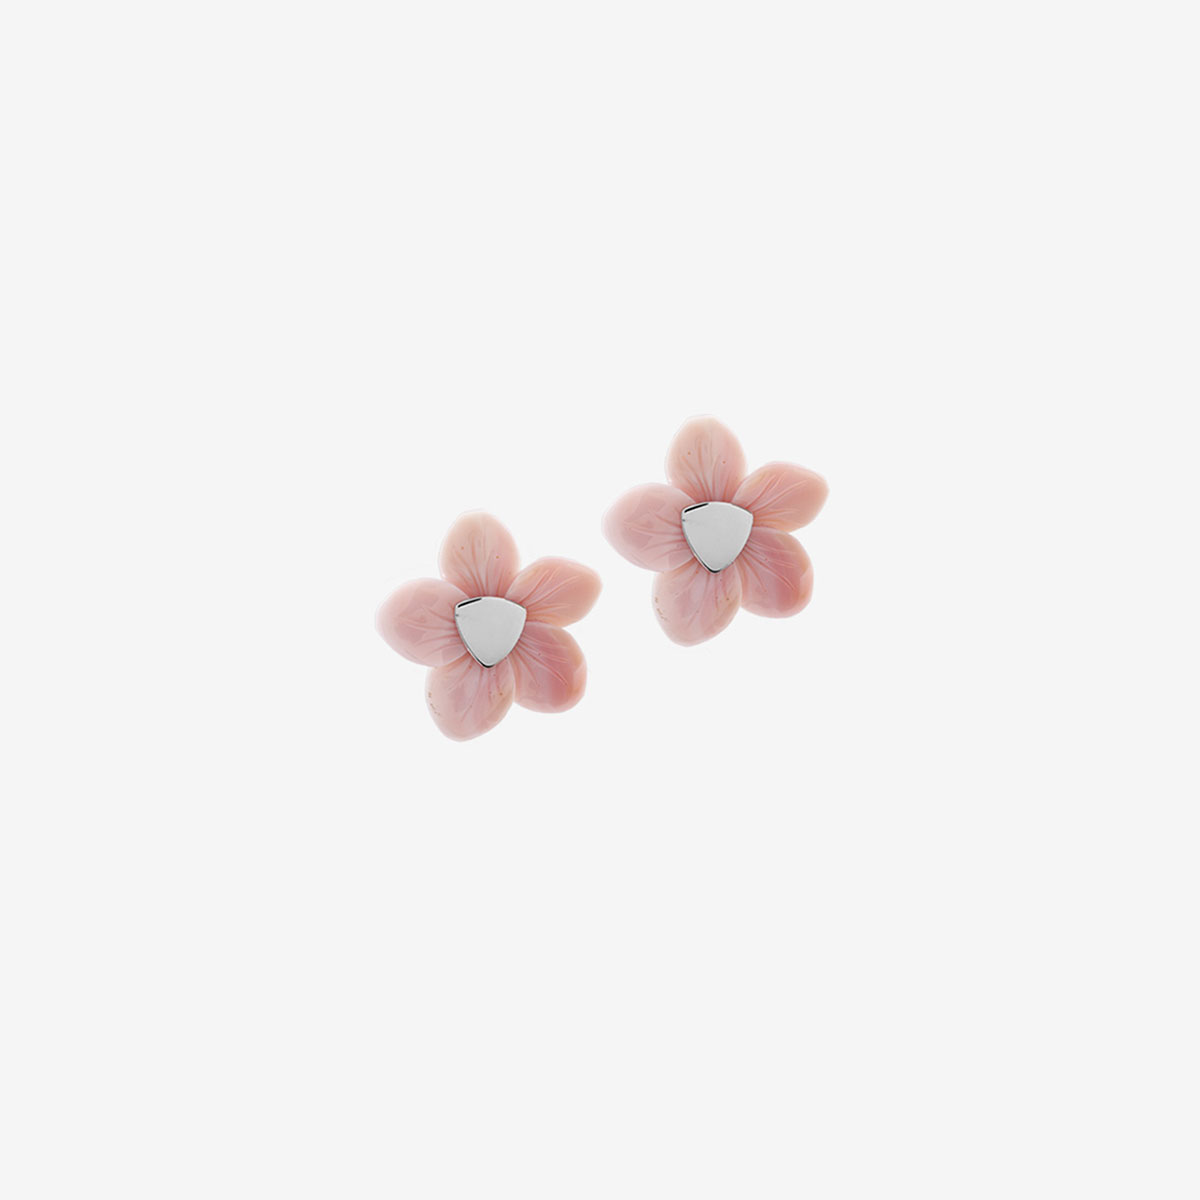 handmade Aria earrings in sterling silver and pink mother-of-pearl designed by Belen Bajo